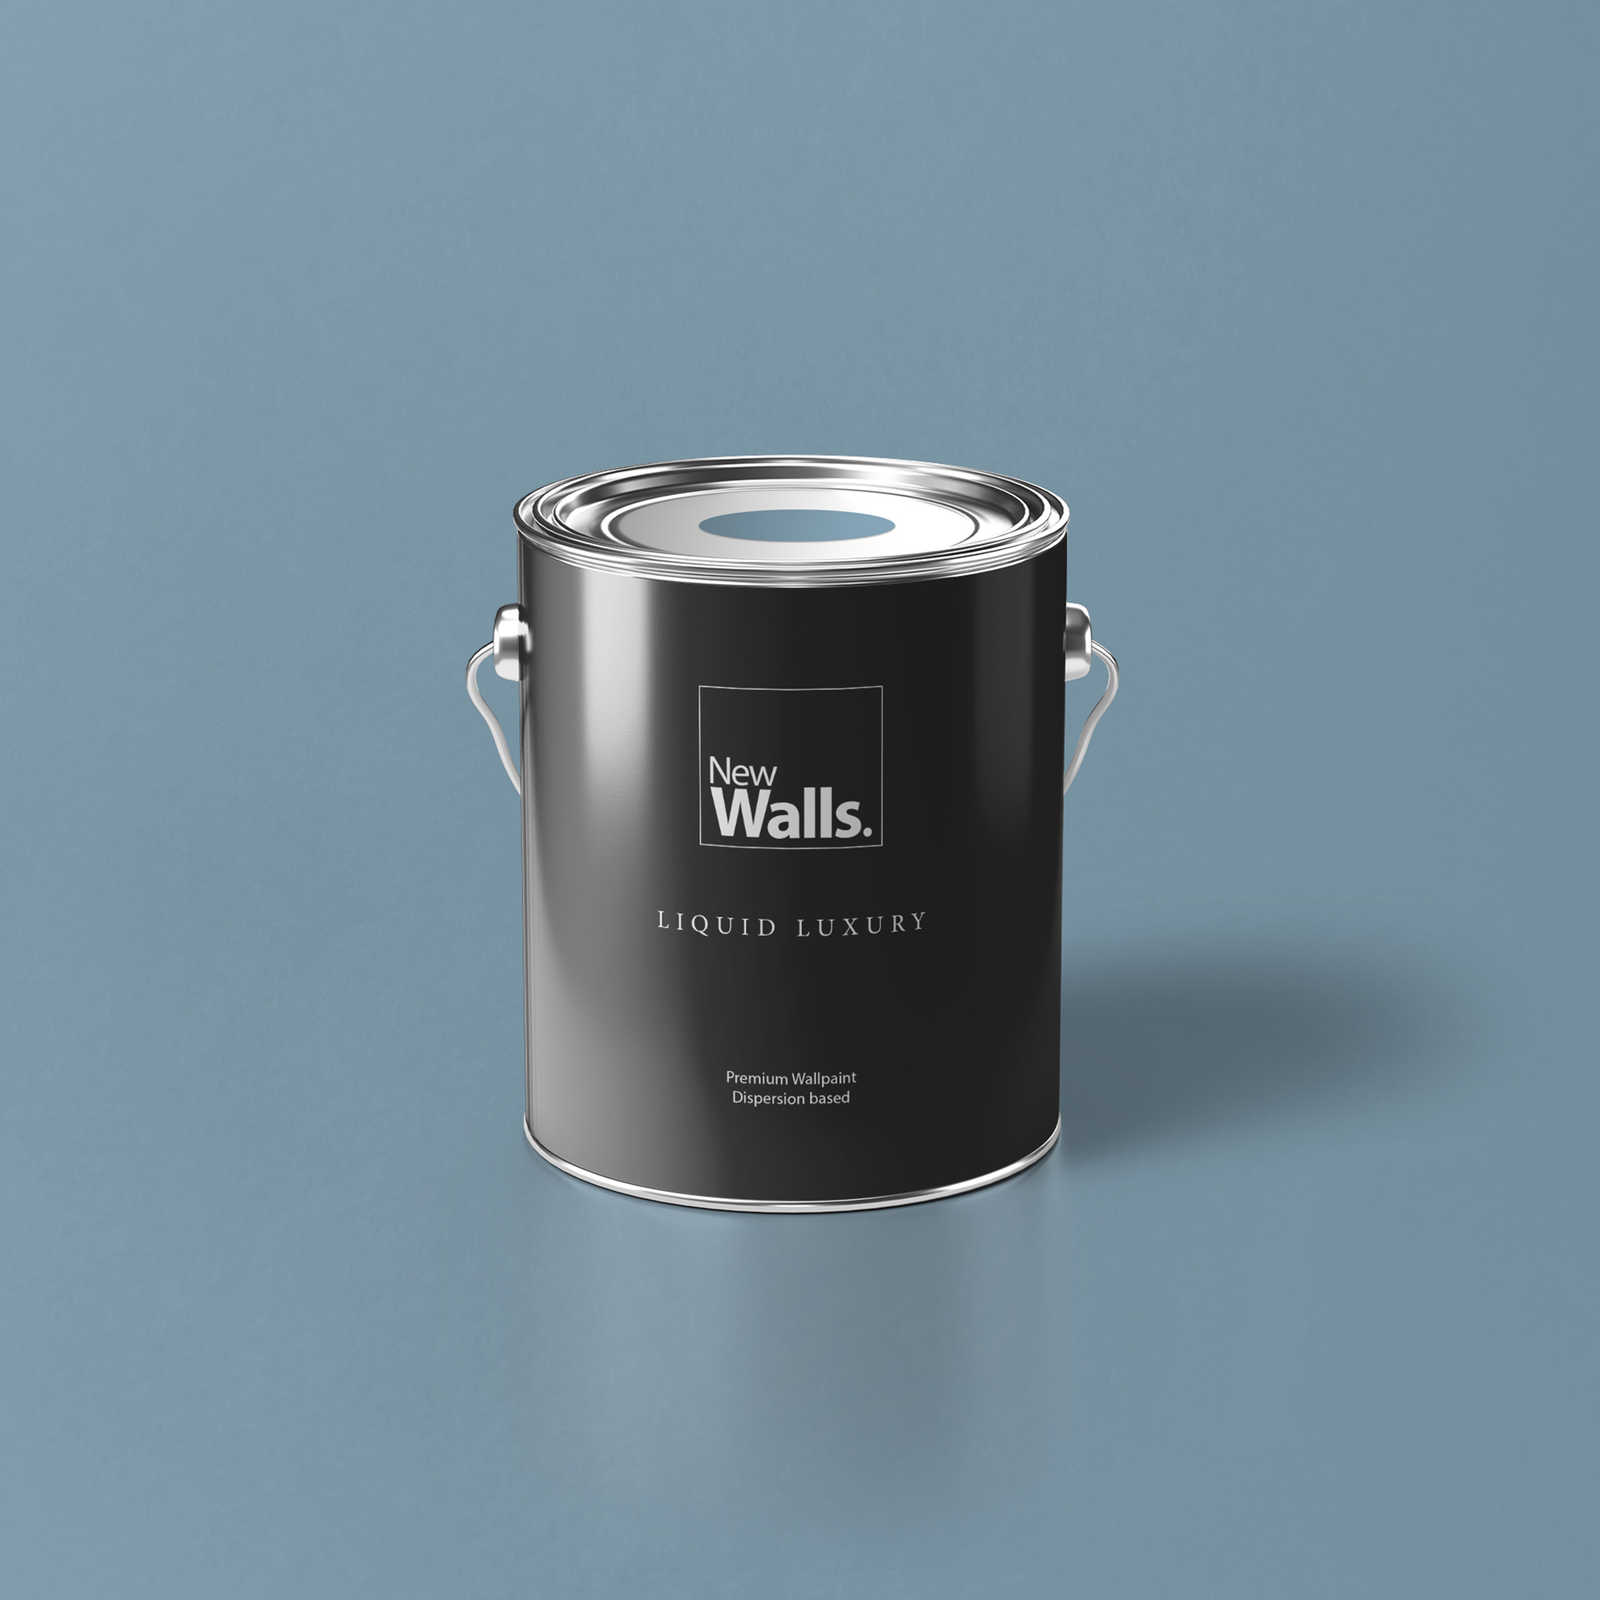 Premium Wall Paint Serene Nordic Blue »Blissful Blue« NW306 – 2.5 litre
